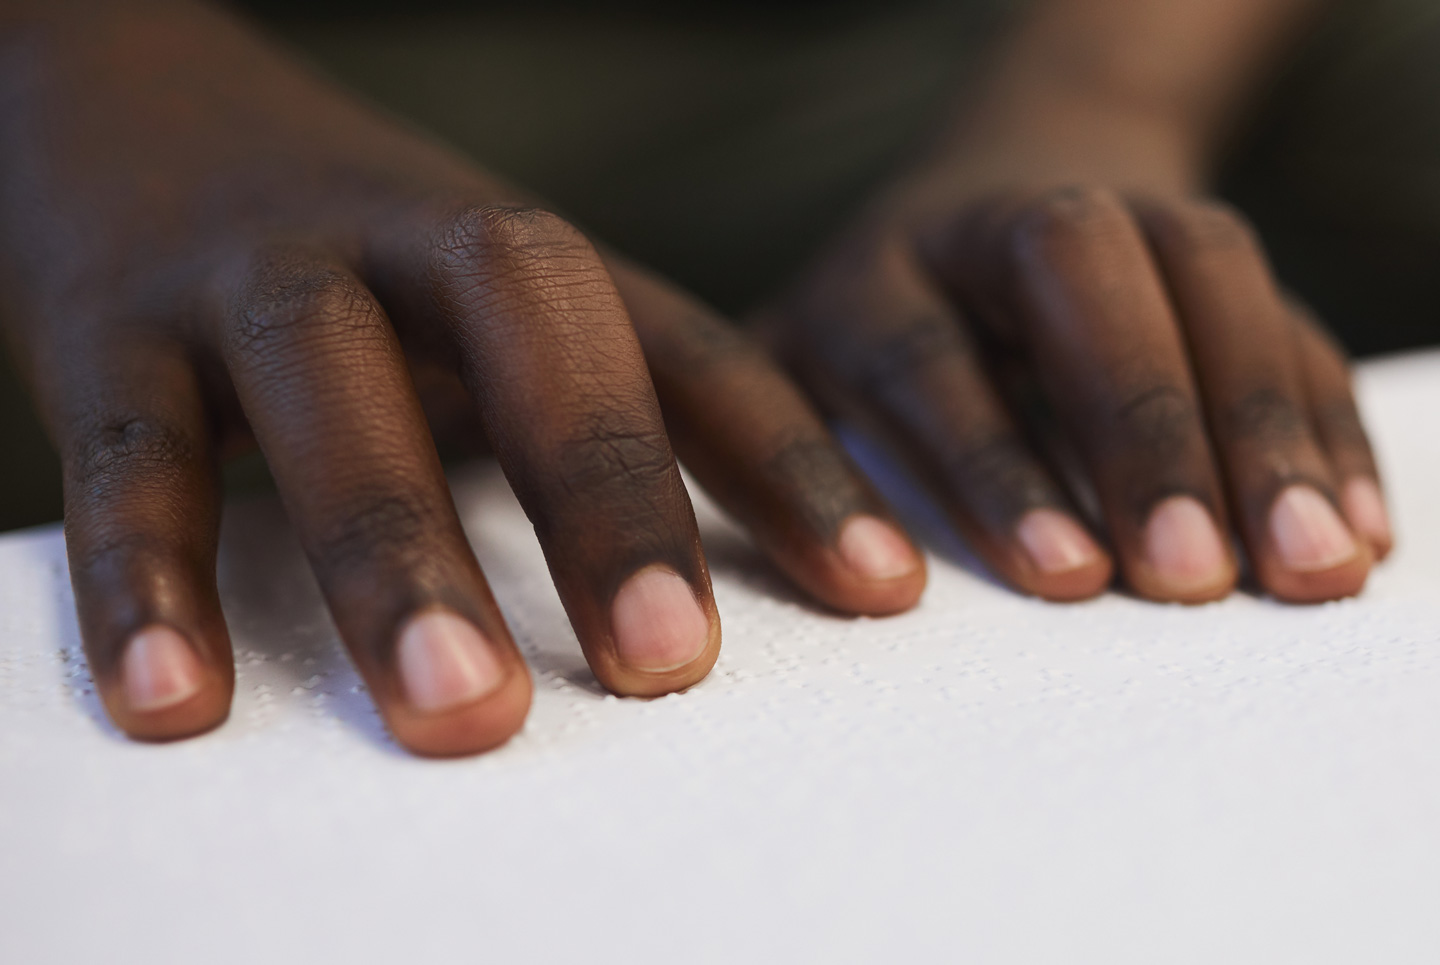 Featured image for “Sarah reads scripture from Braille”